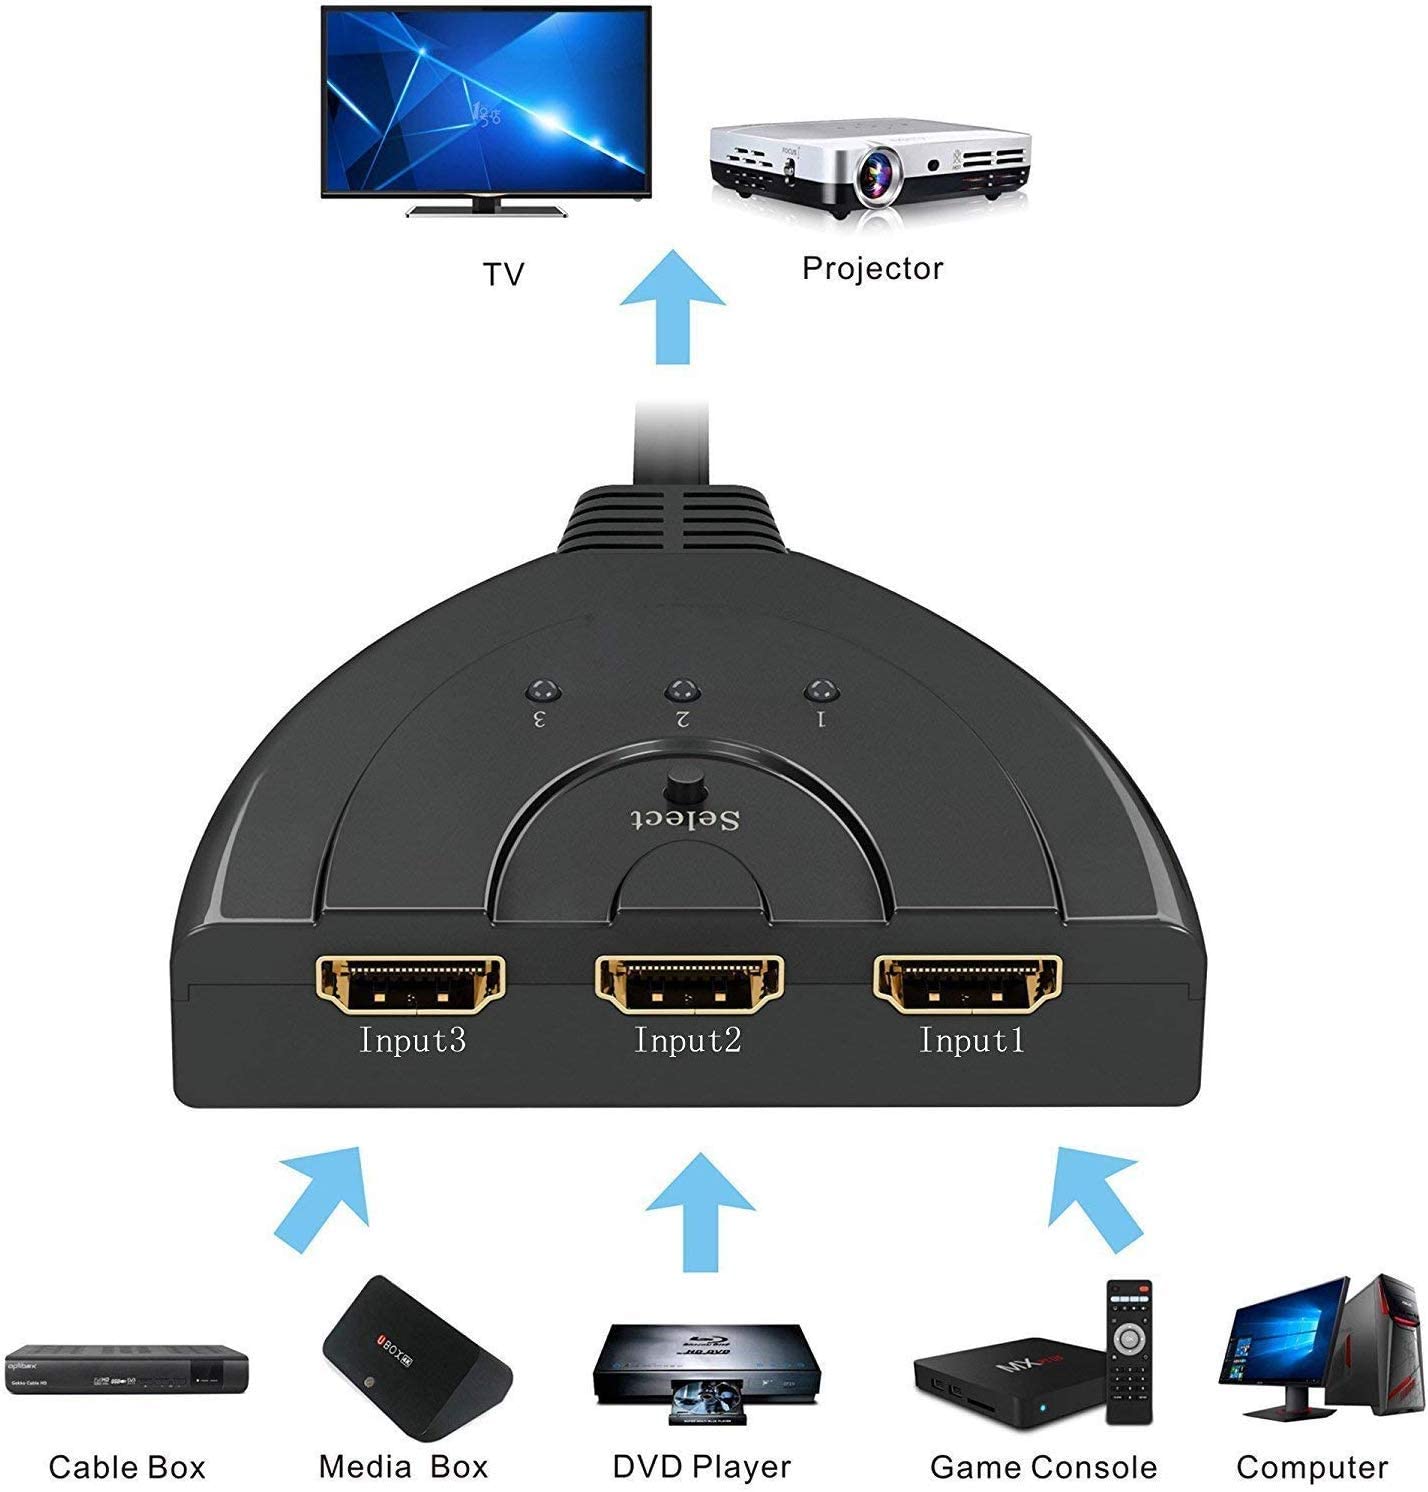 HSW0301D: 3 ports HDMI 1.3B Pigtail Auto Switch - Click Image to Close